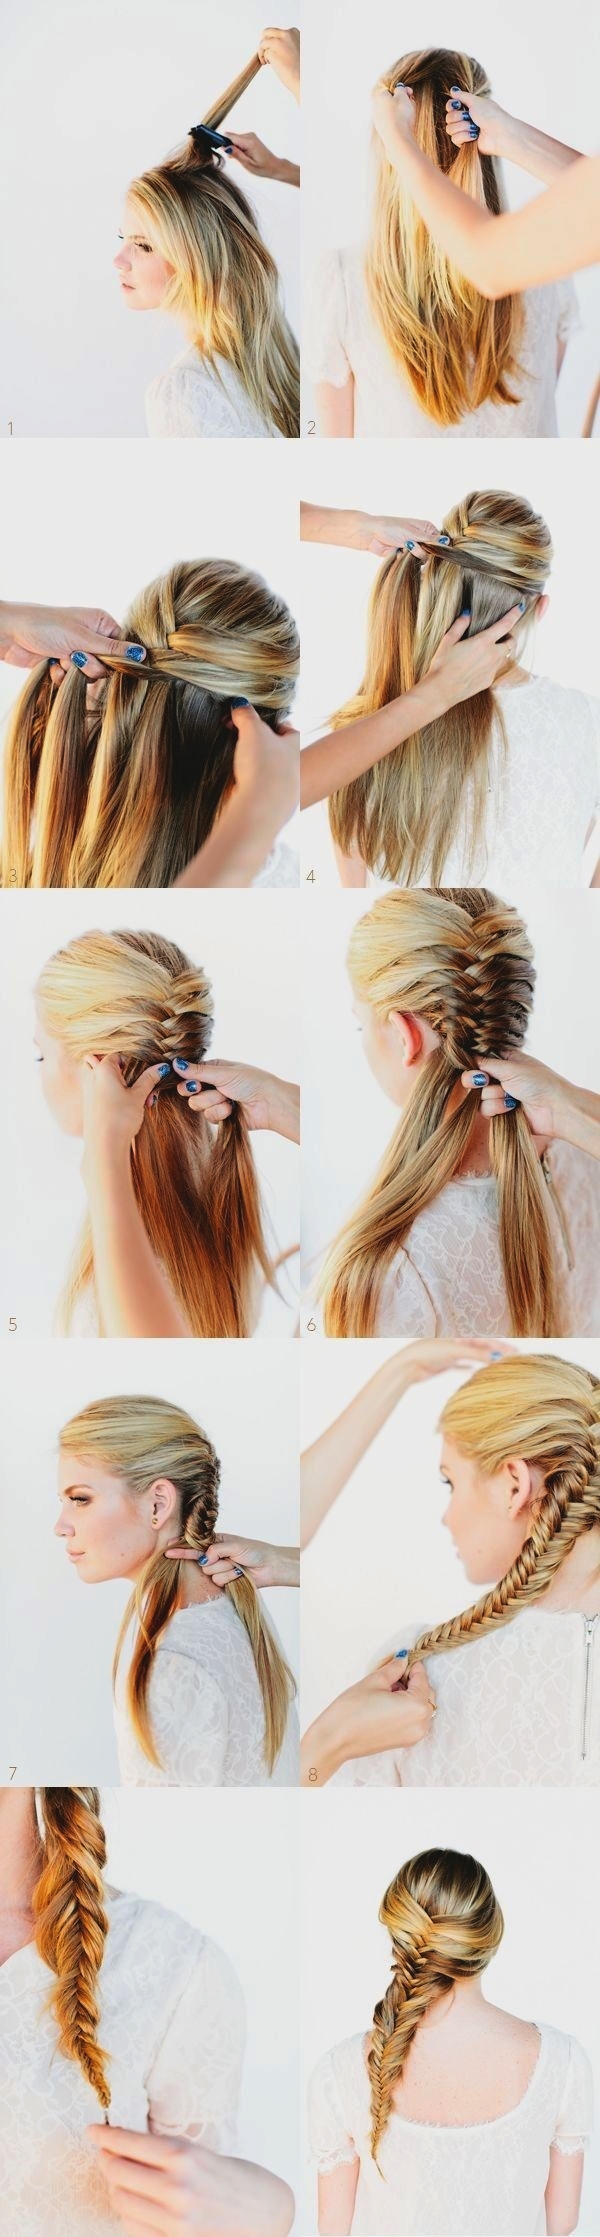 Easy Step By Step Hairstyles for Long Hair1